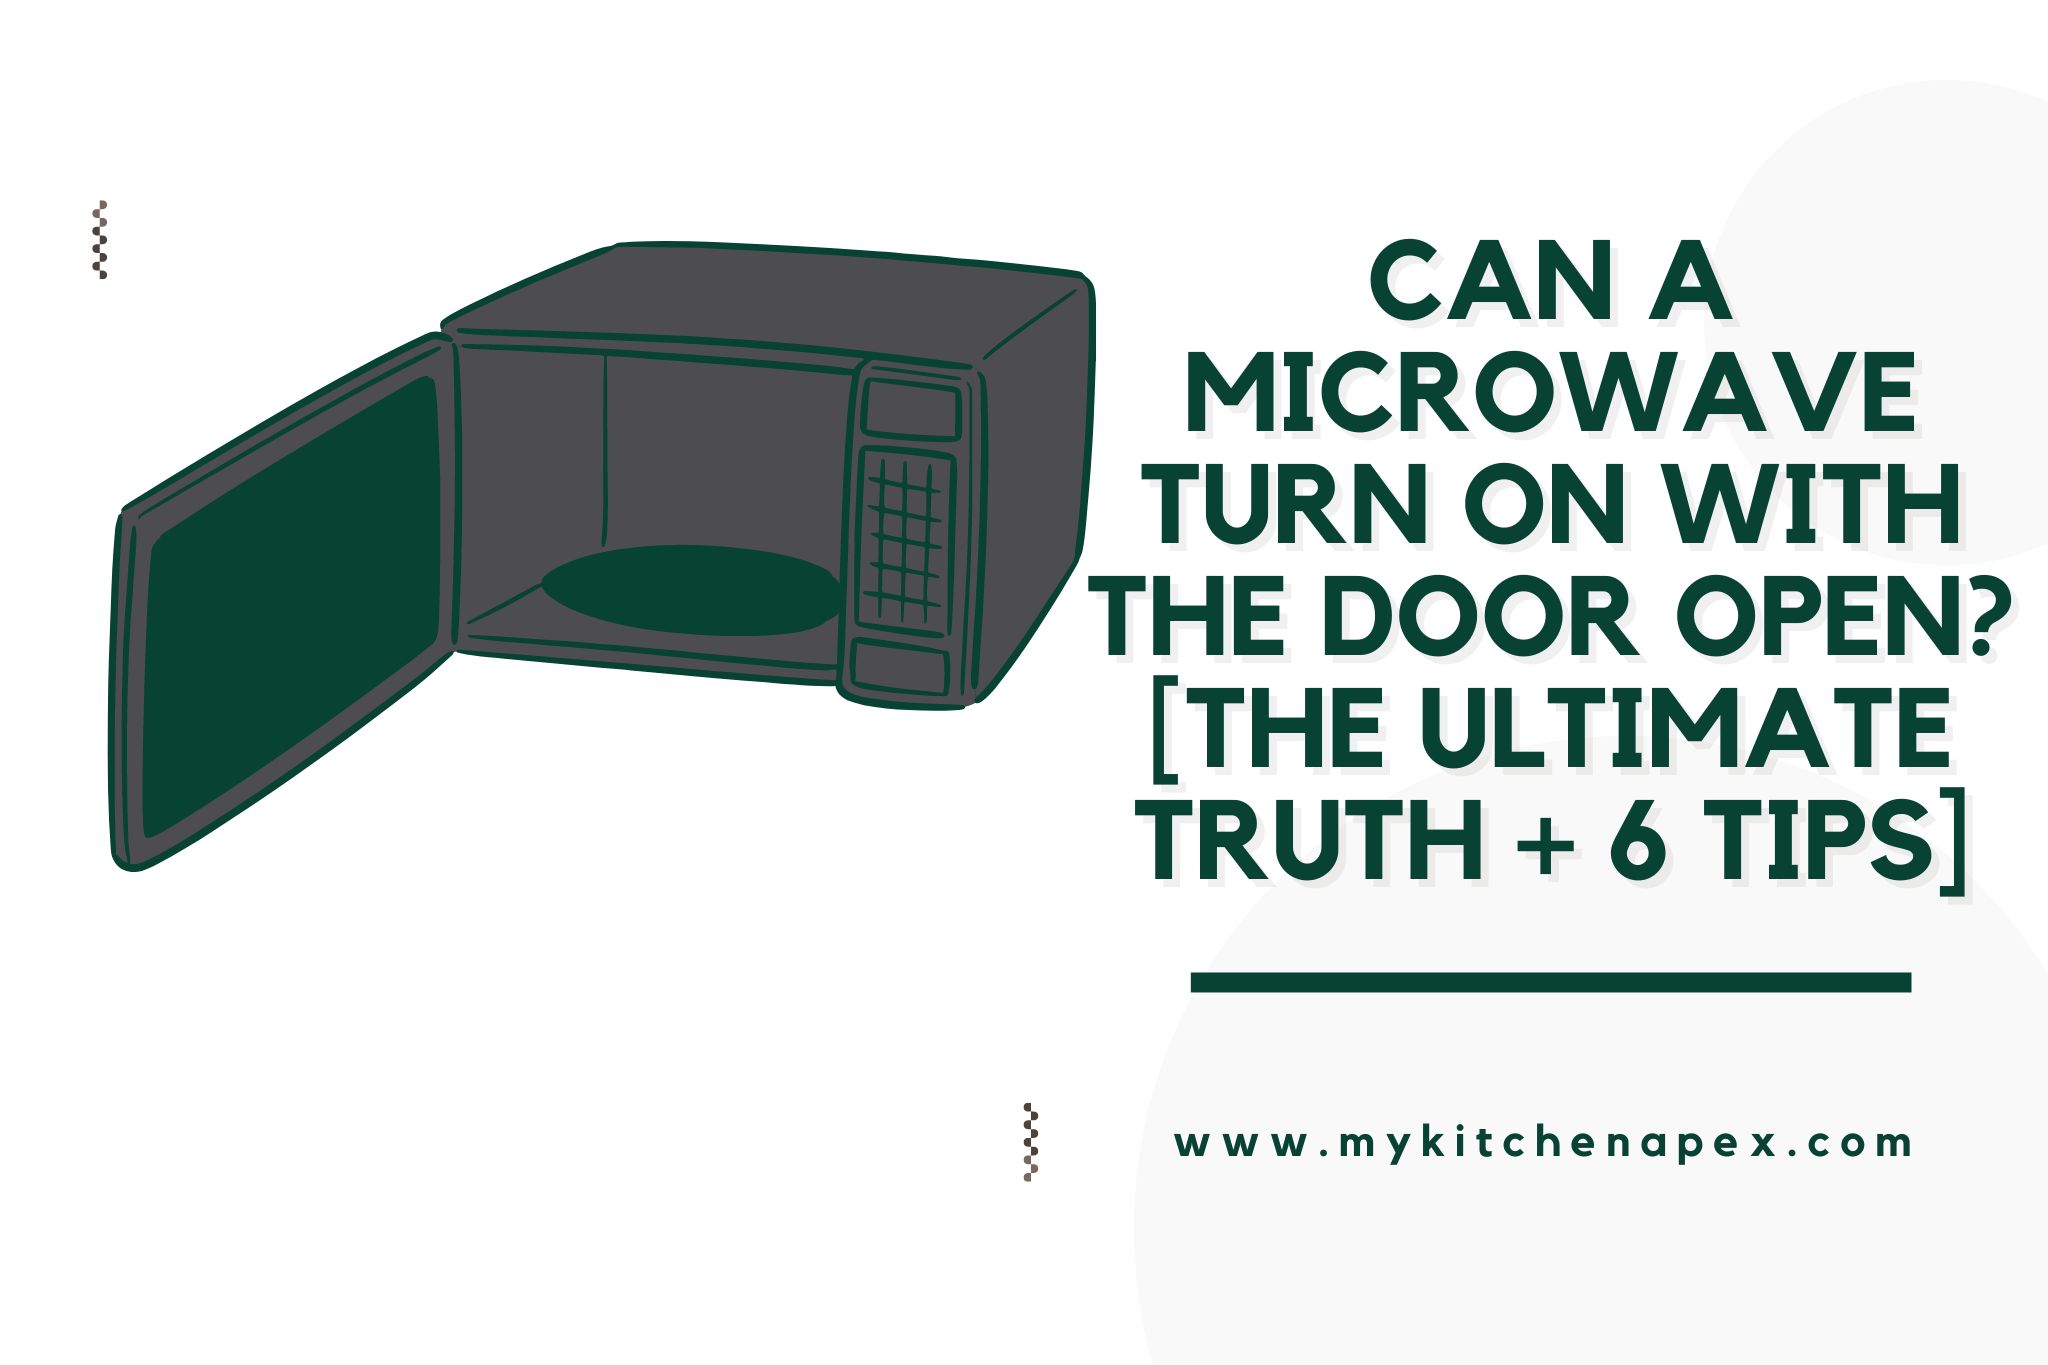 Can A Microwave Turn On With The Door Open? [The ULTIMATE Truth + 6 Tips]